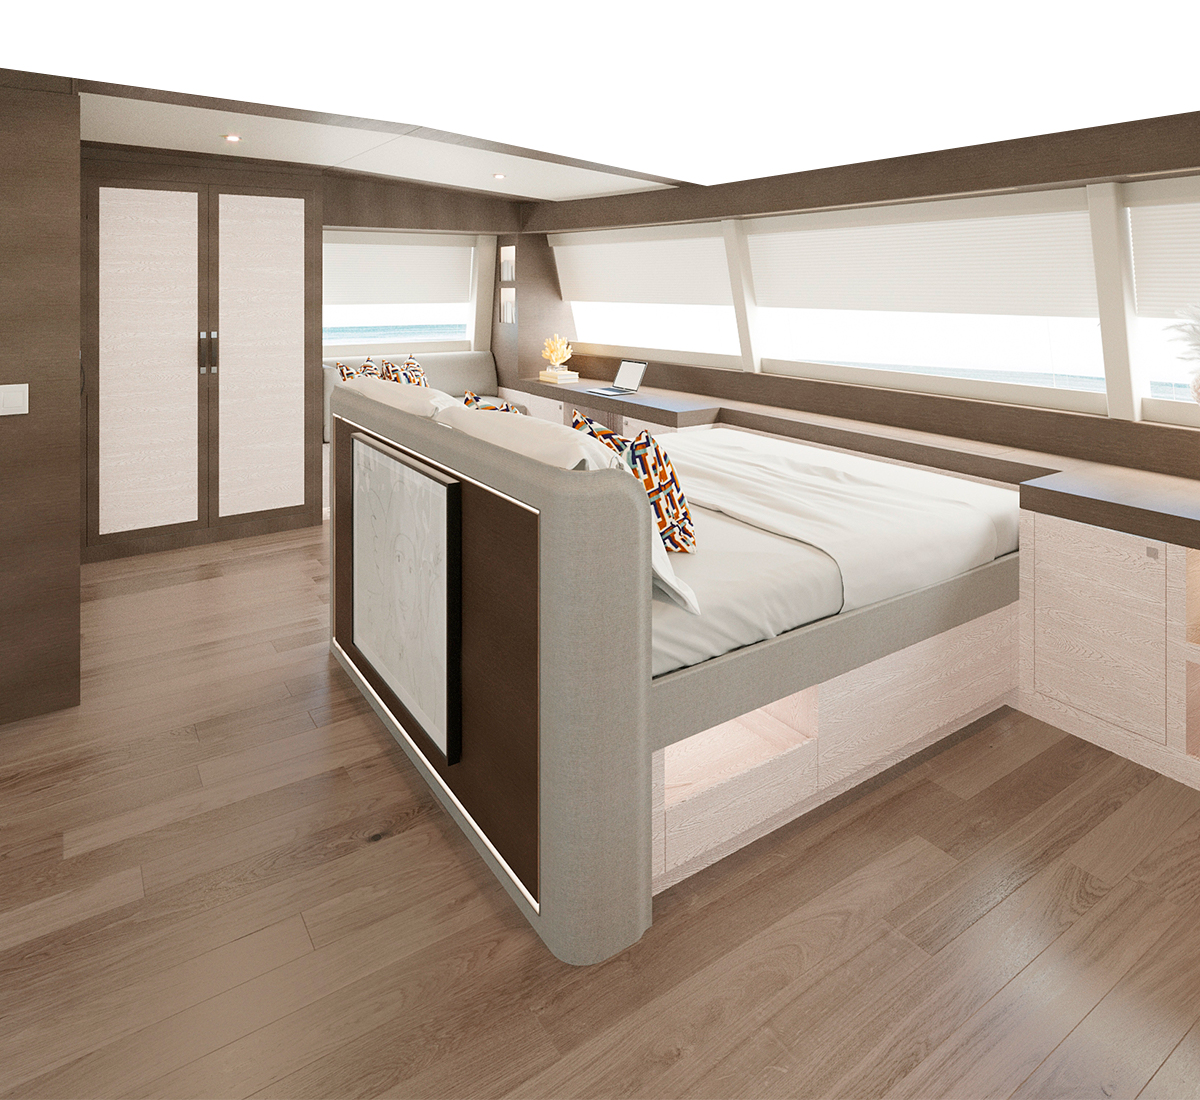 Master bedroom on the upper deck of a boat